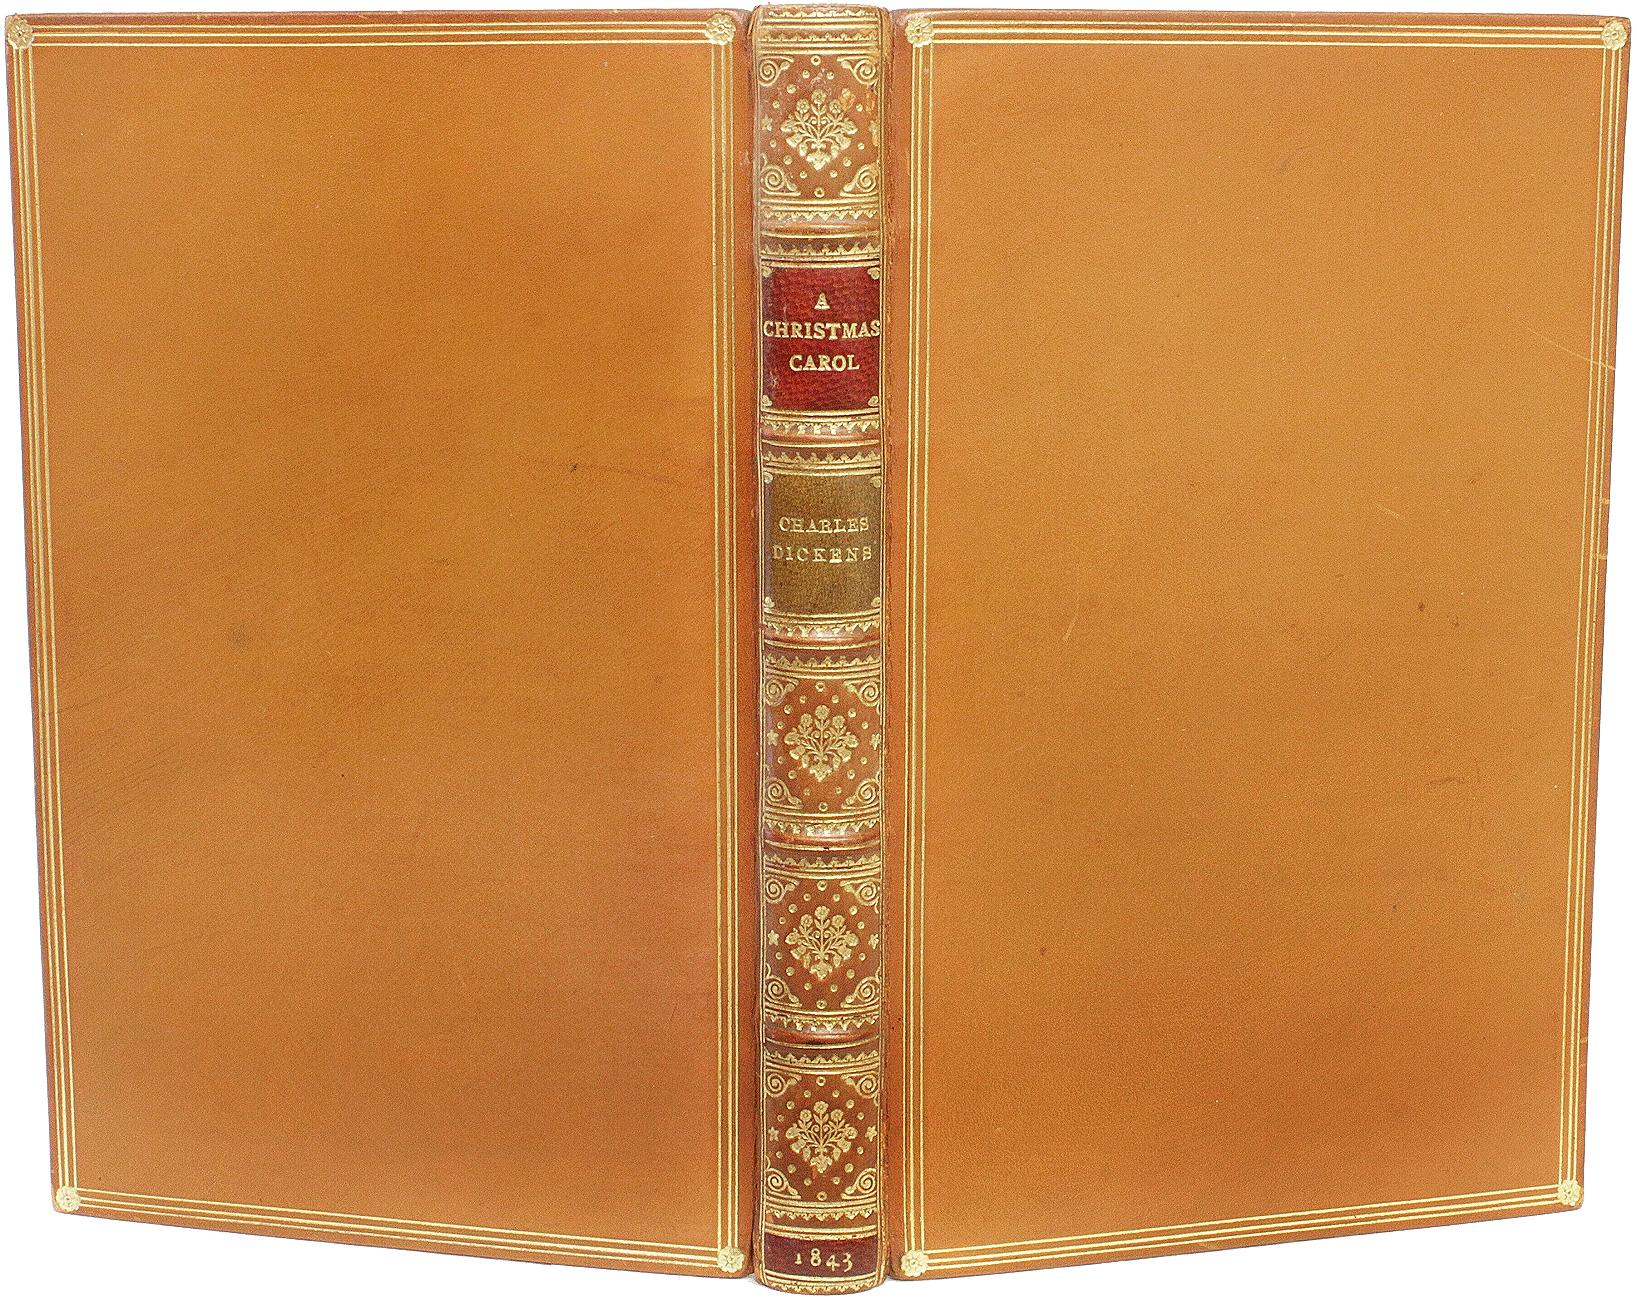 AUTHOR: DICKENS, Charles. 

TITLE: A Christmas Carol. In Prose. Being A Ghost Story of Christmas.

PUBLISHER: London: Chapman & Hall, 1843.

DESCRIPTION: FIRST EDITION SECOND ISSUE. 1 vol., 